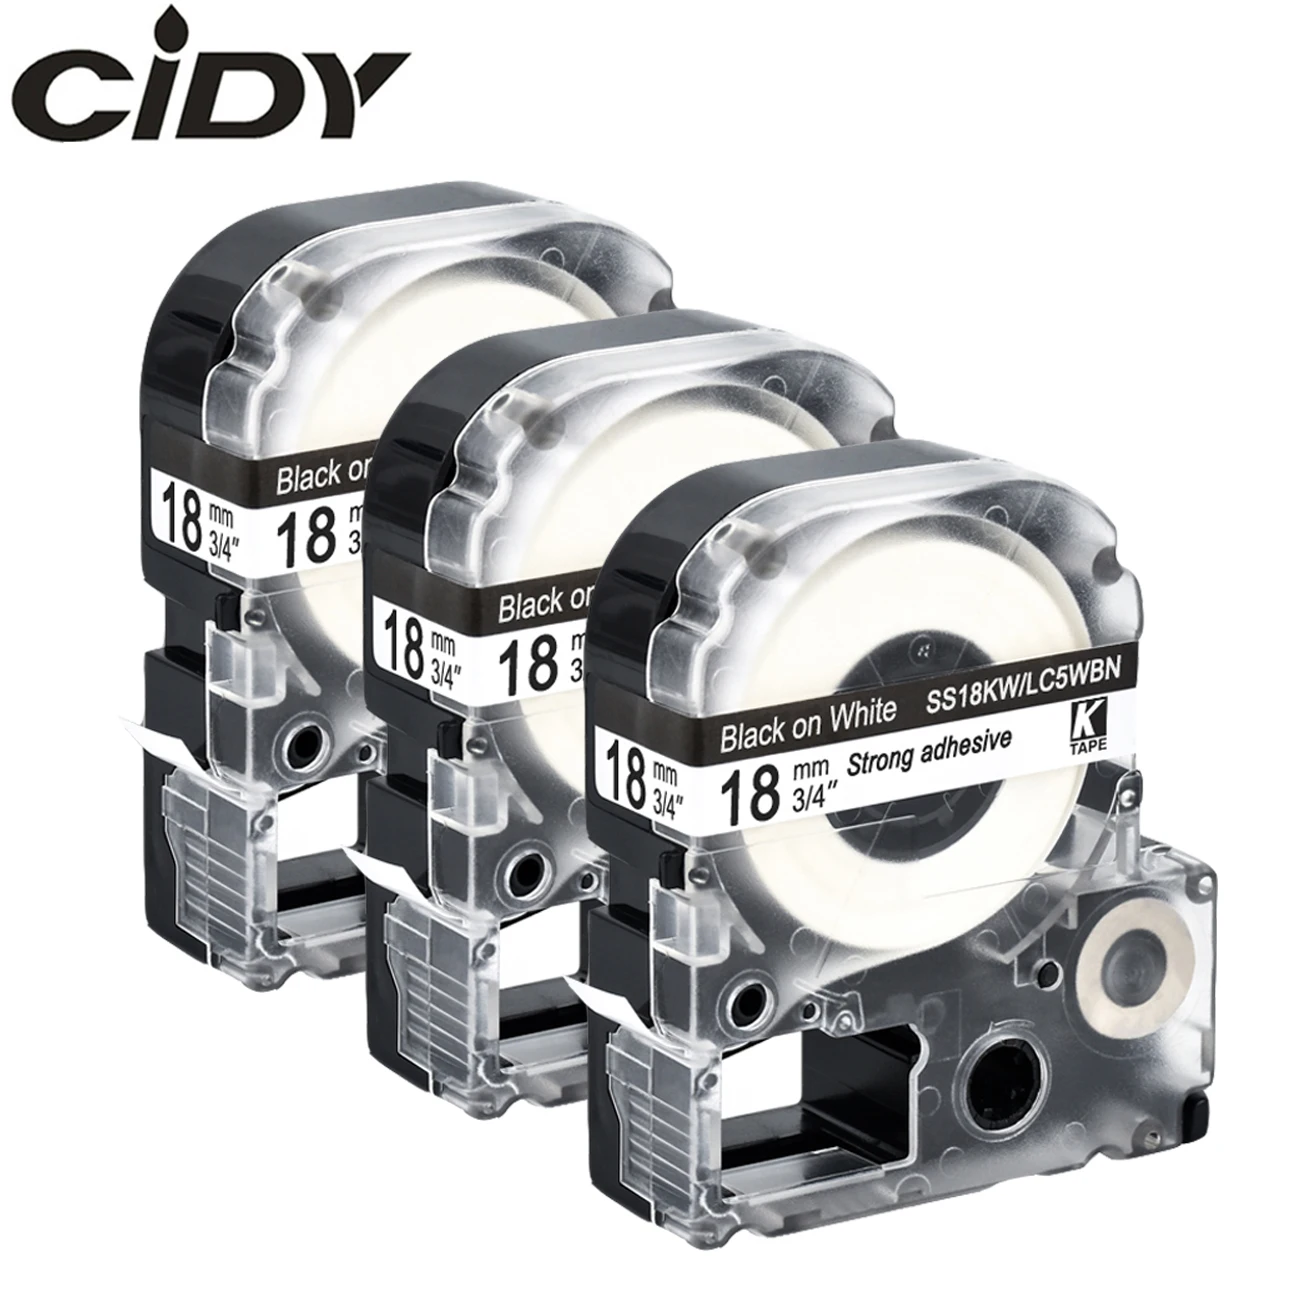 

CIDY 3 ROLLS compatible SS18KW LC-5WBN LC5WBN9 18MM Black on White label tape for kingjim label maker LW400 SR150 LW-600P LW-800